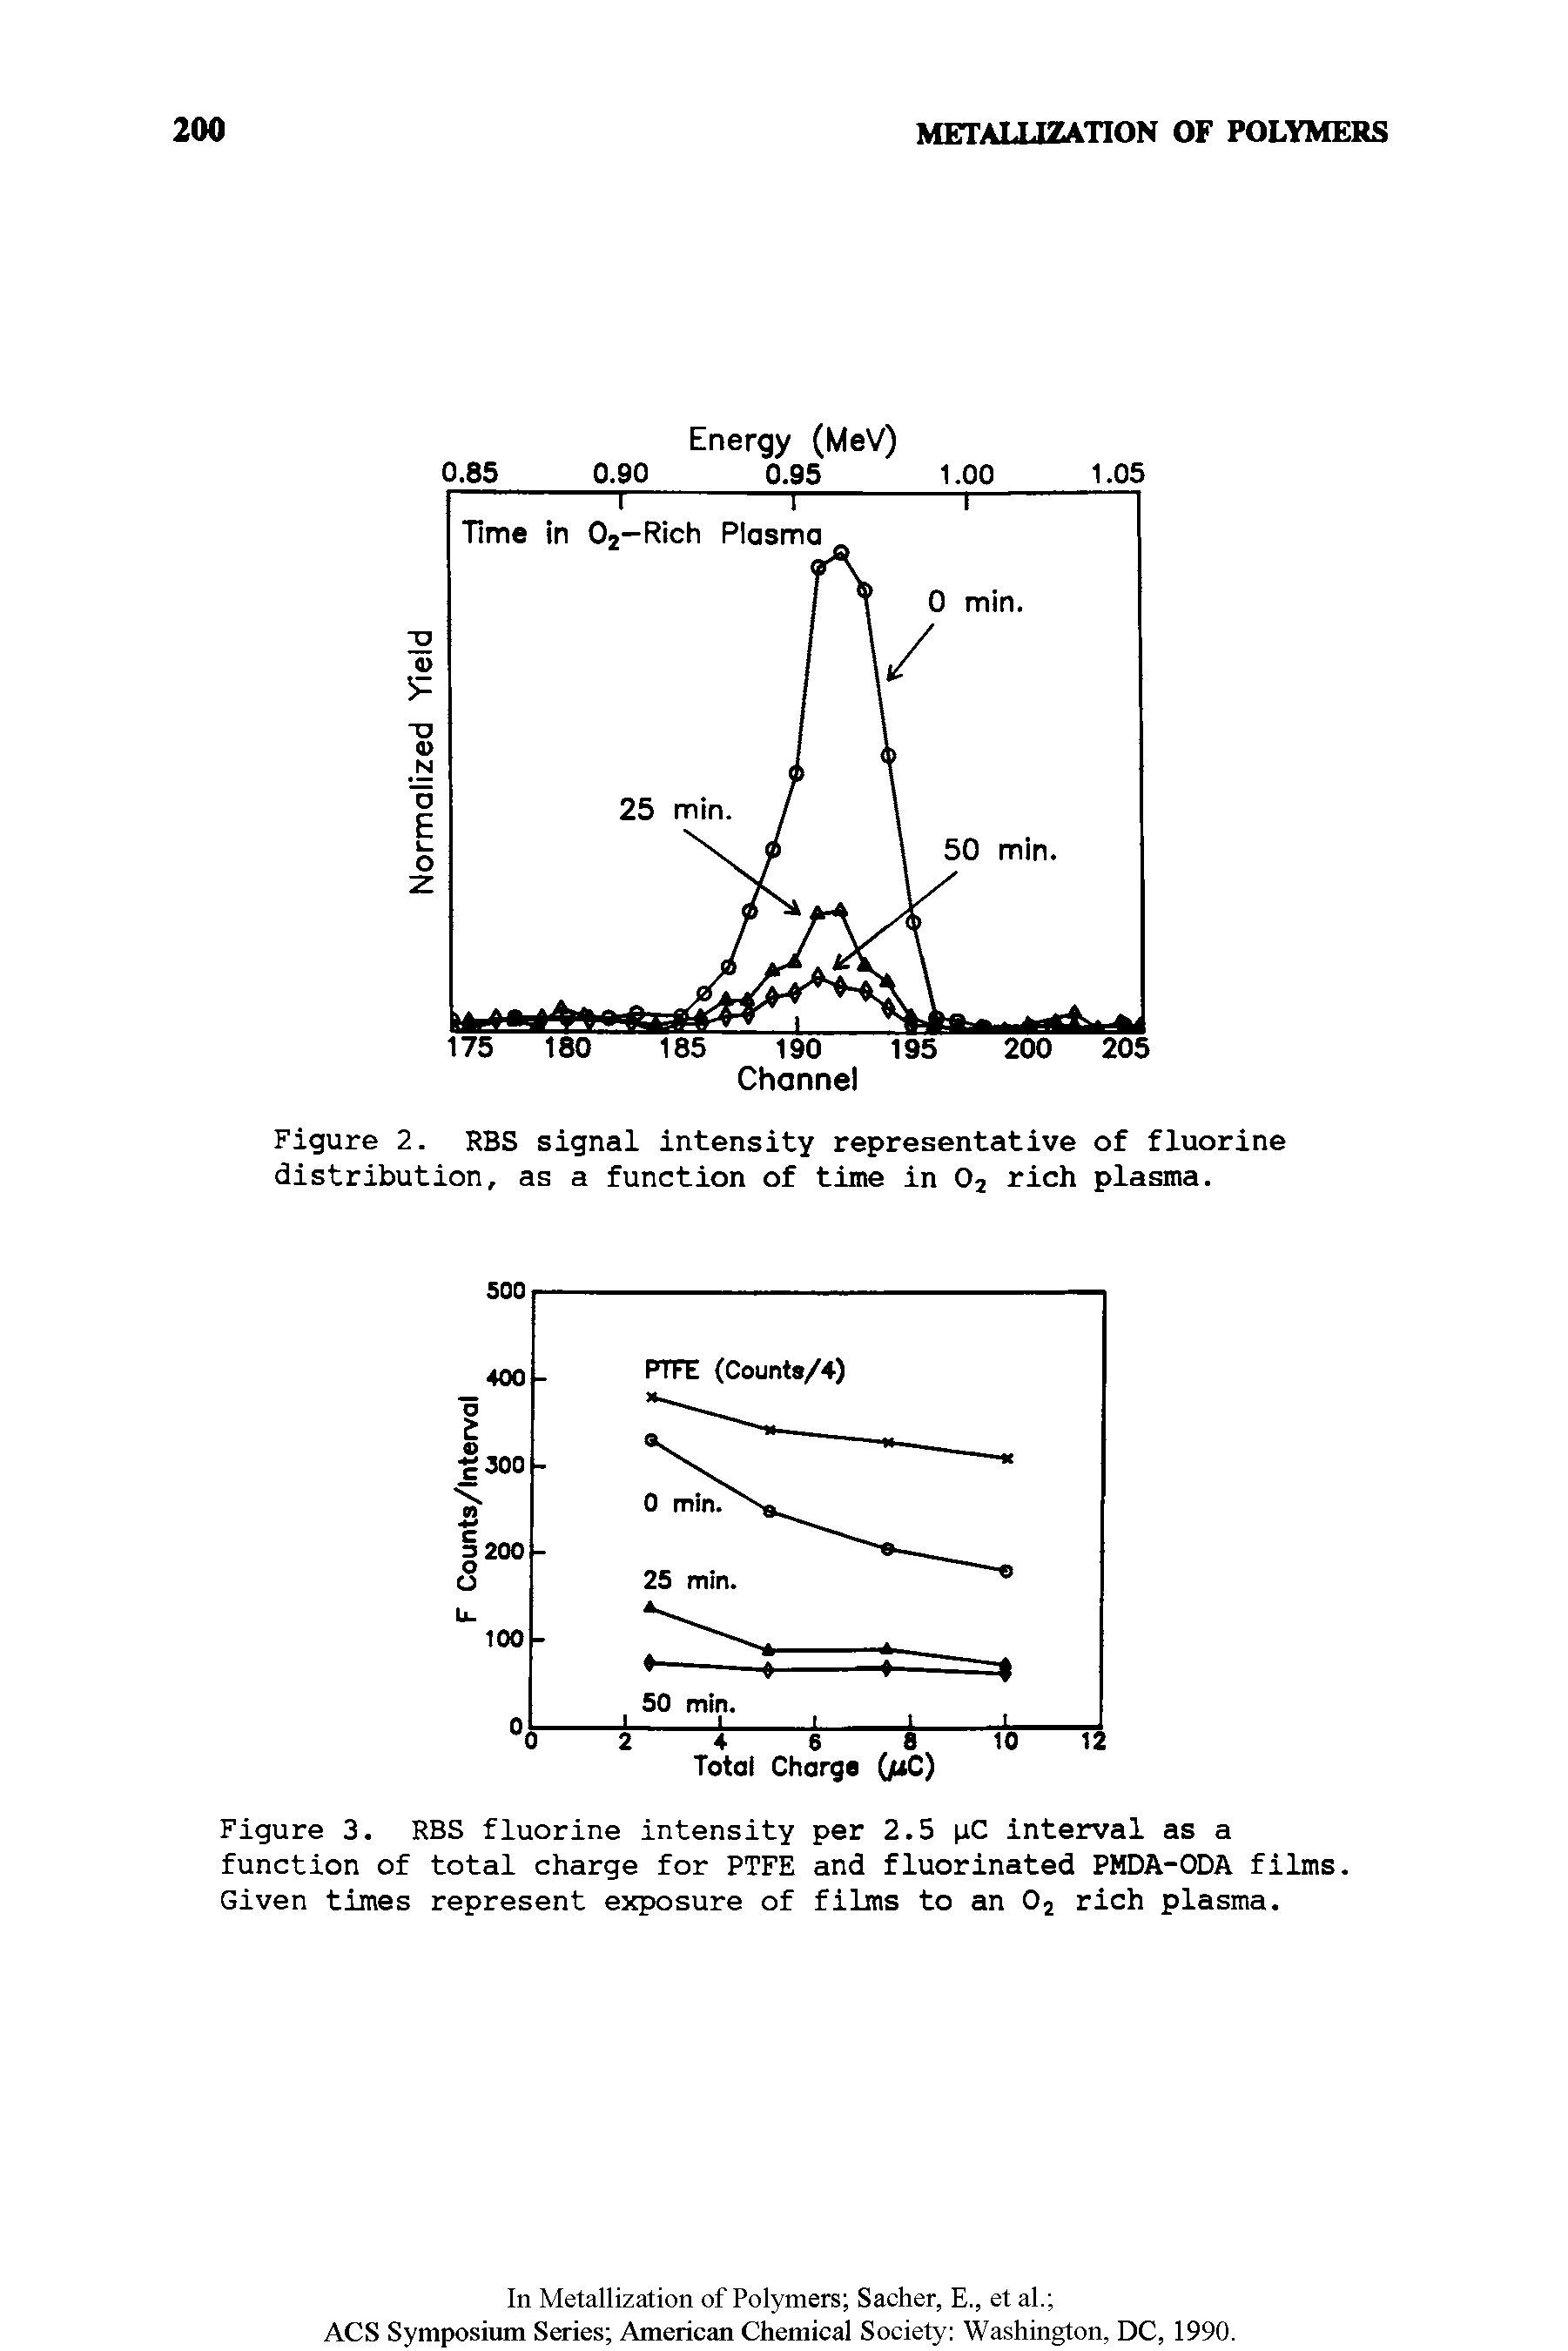 Figure 2. RBS signal intensity representative of fluorine distribution, as a function of time in 02 rich plasma.